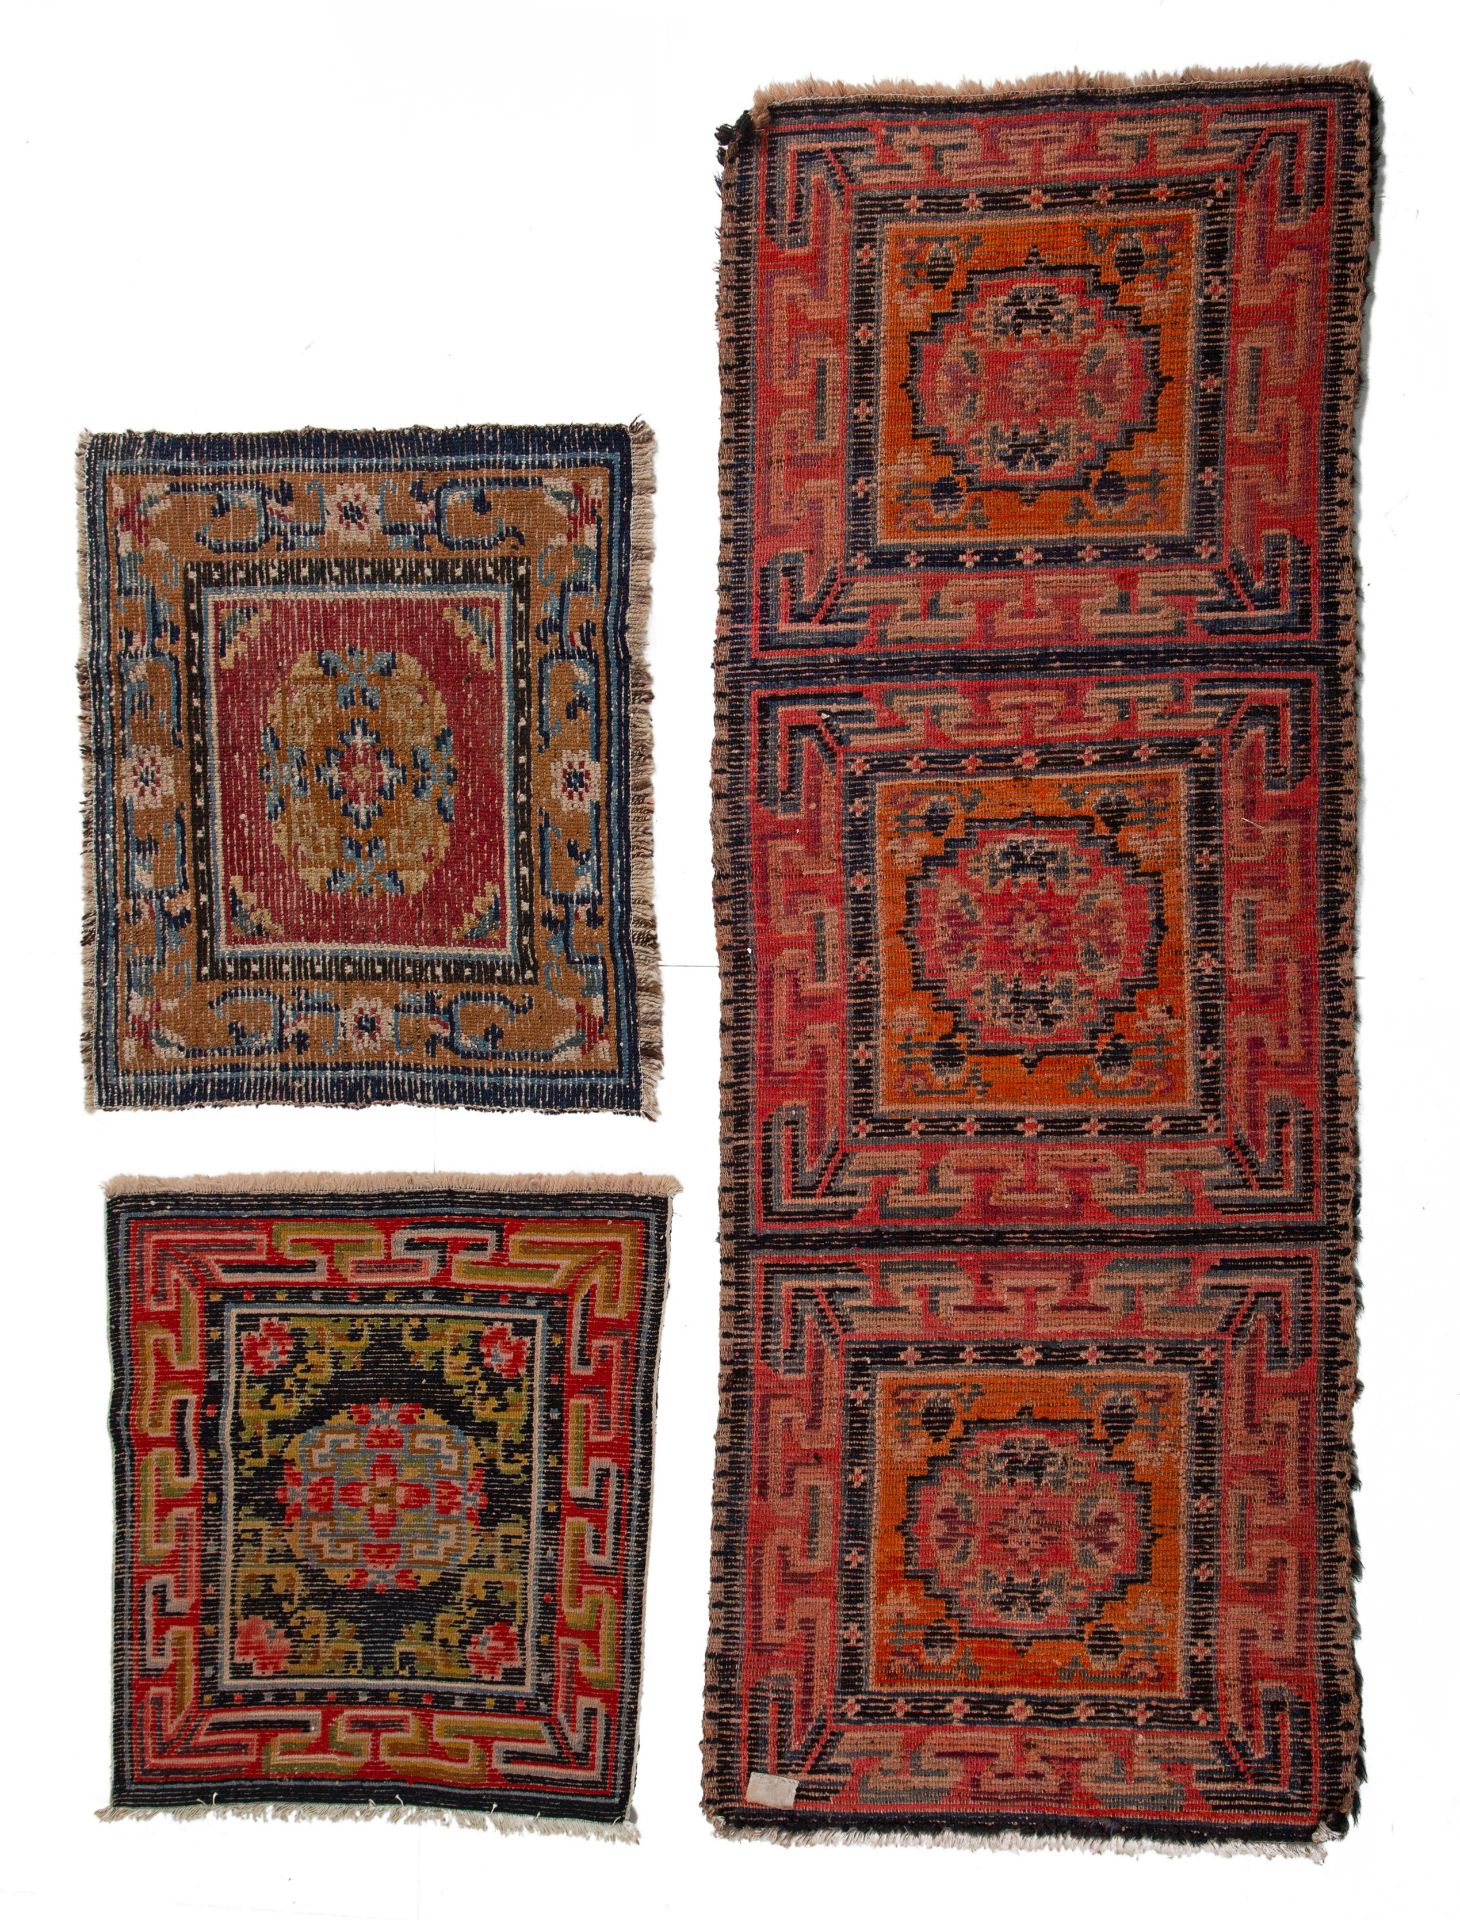 A collection of three Tibetan rugs, early 20thC, 72 x 185 cm, 65 x 68,5 - 68 x 76 cm - Image 2 of 2